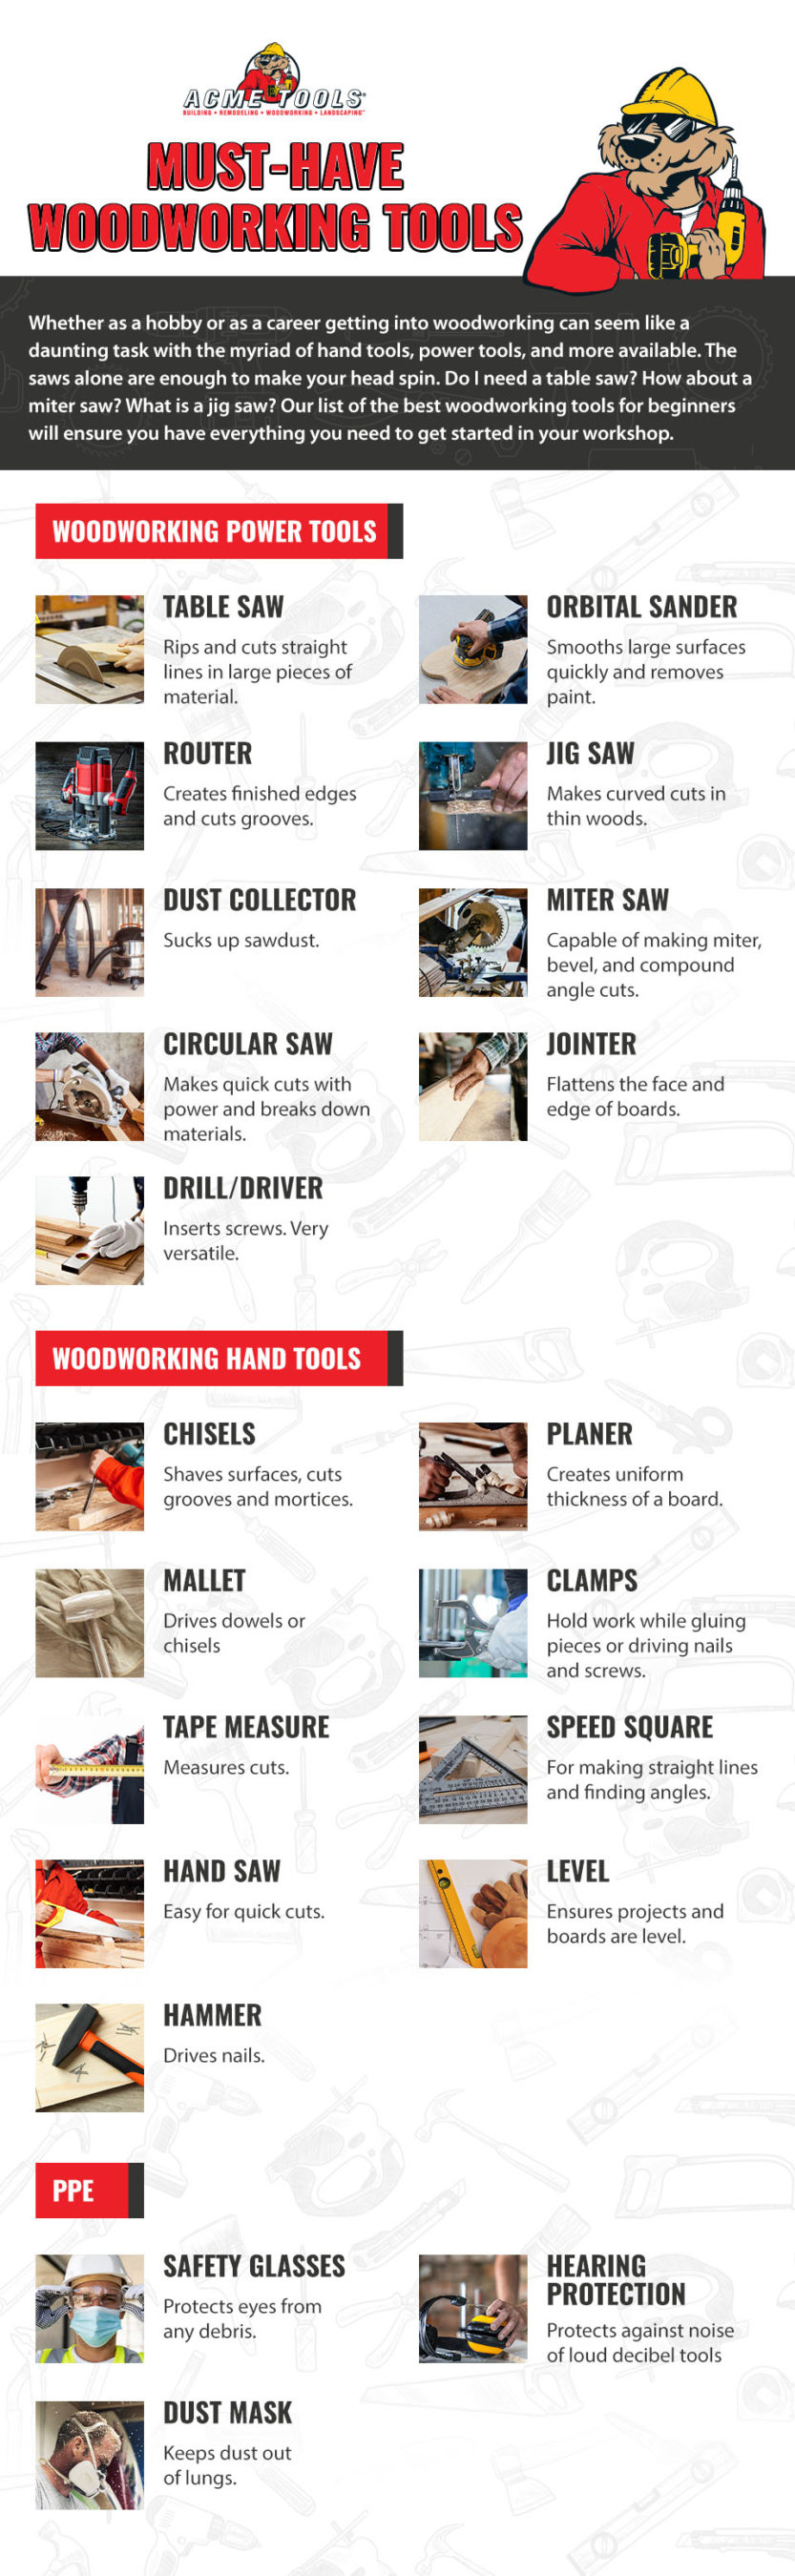 A list of must have woodworking tools for beginners.